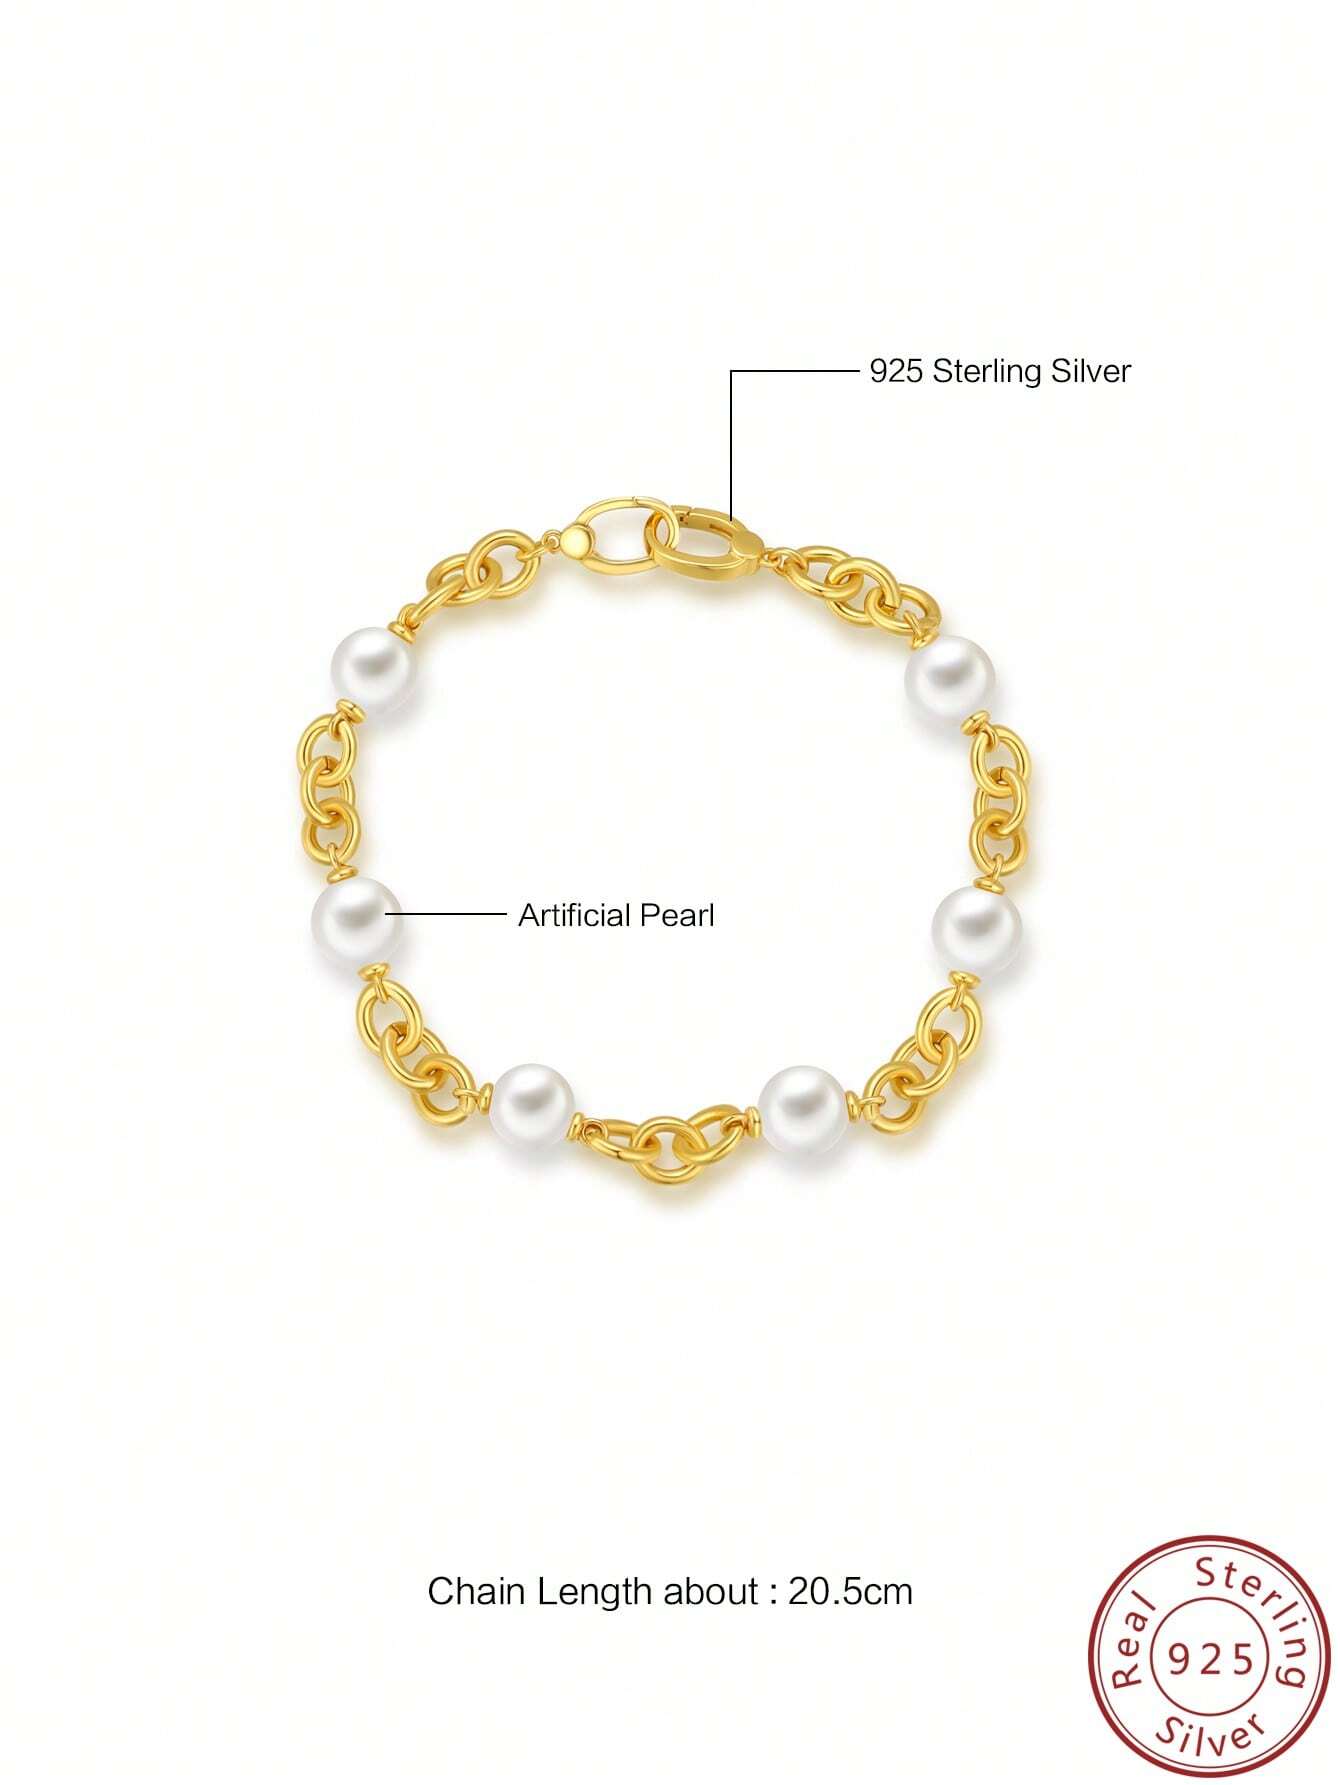 18k Gold Plated Sterling Silver, Inlaid With White Round Artificial Pearls Set